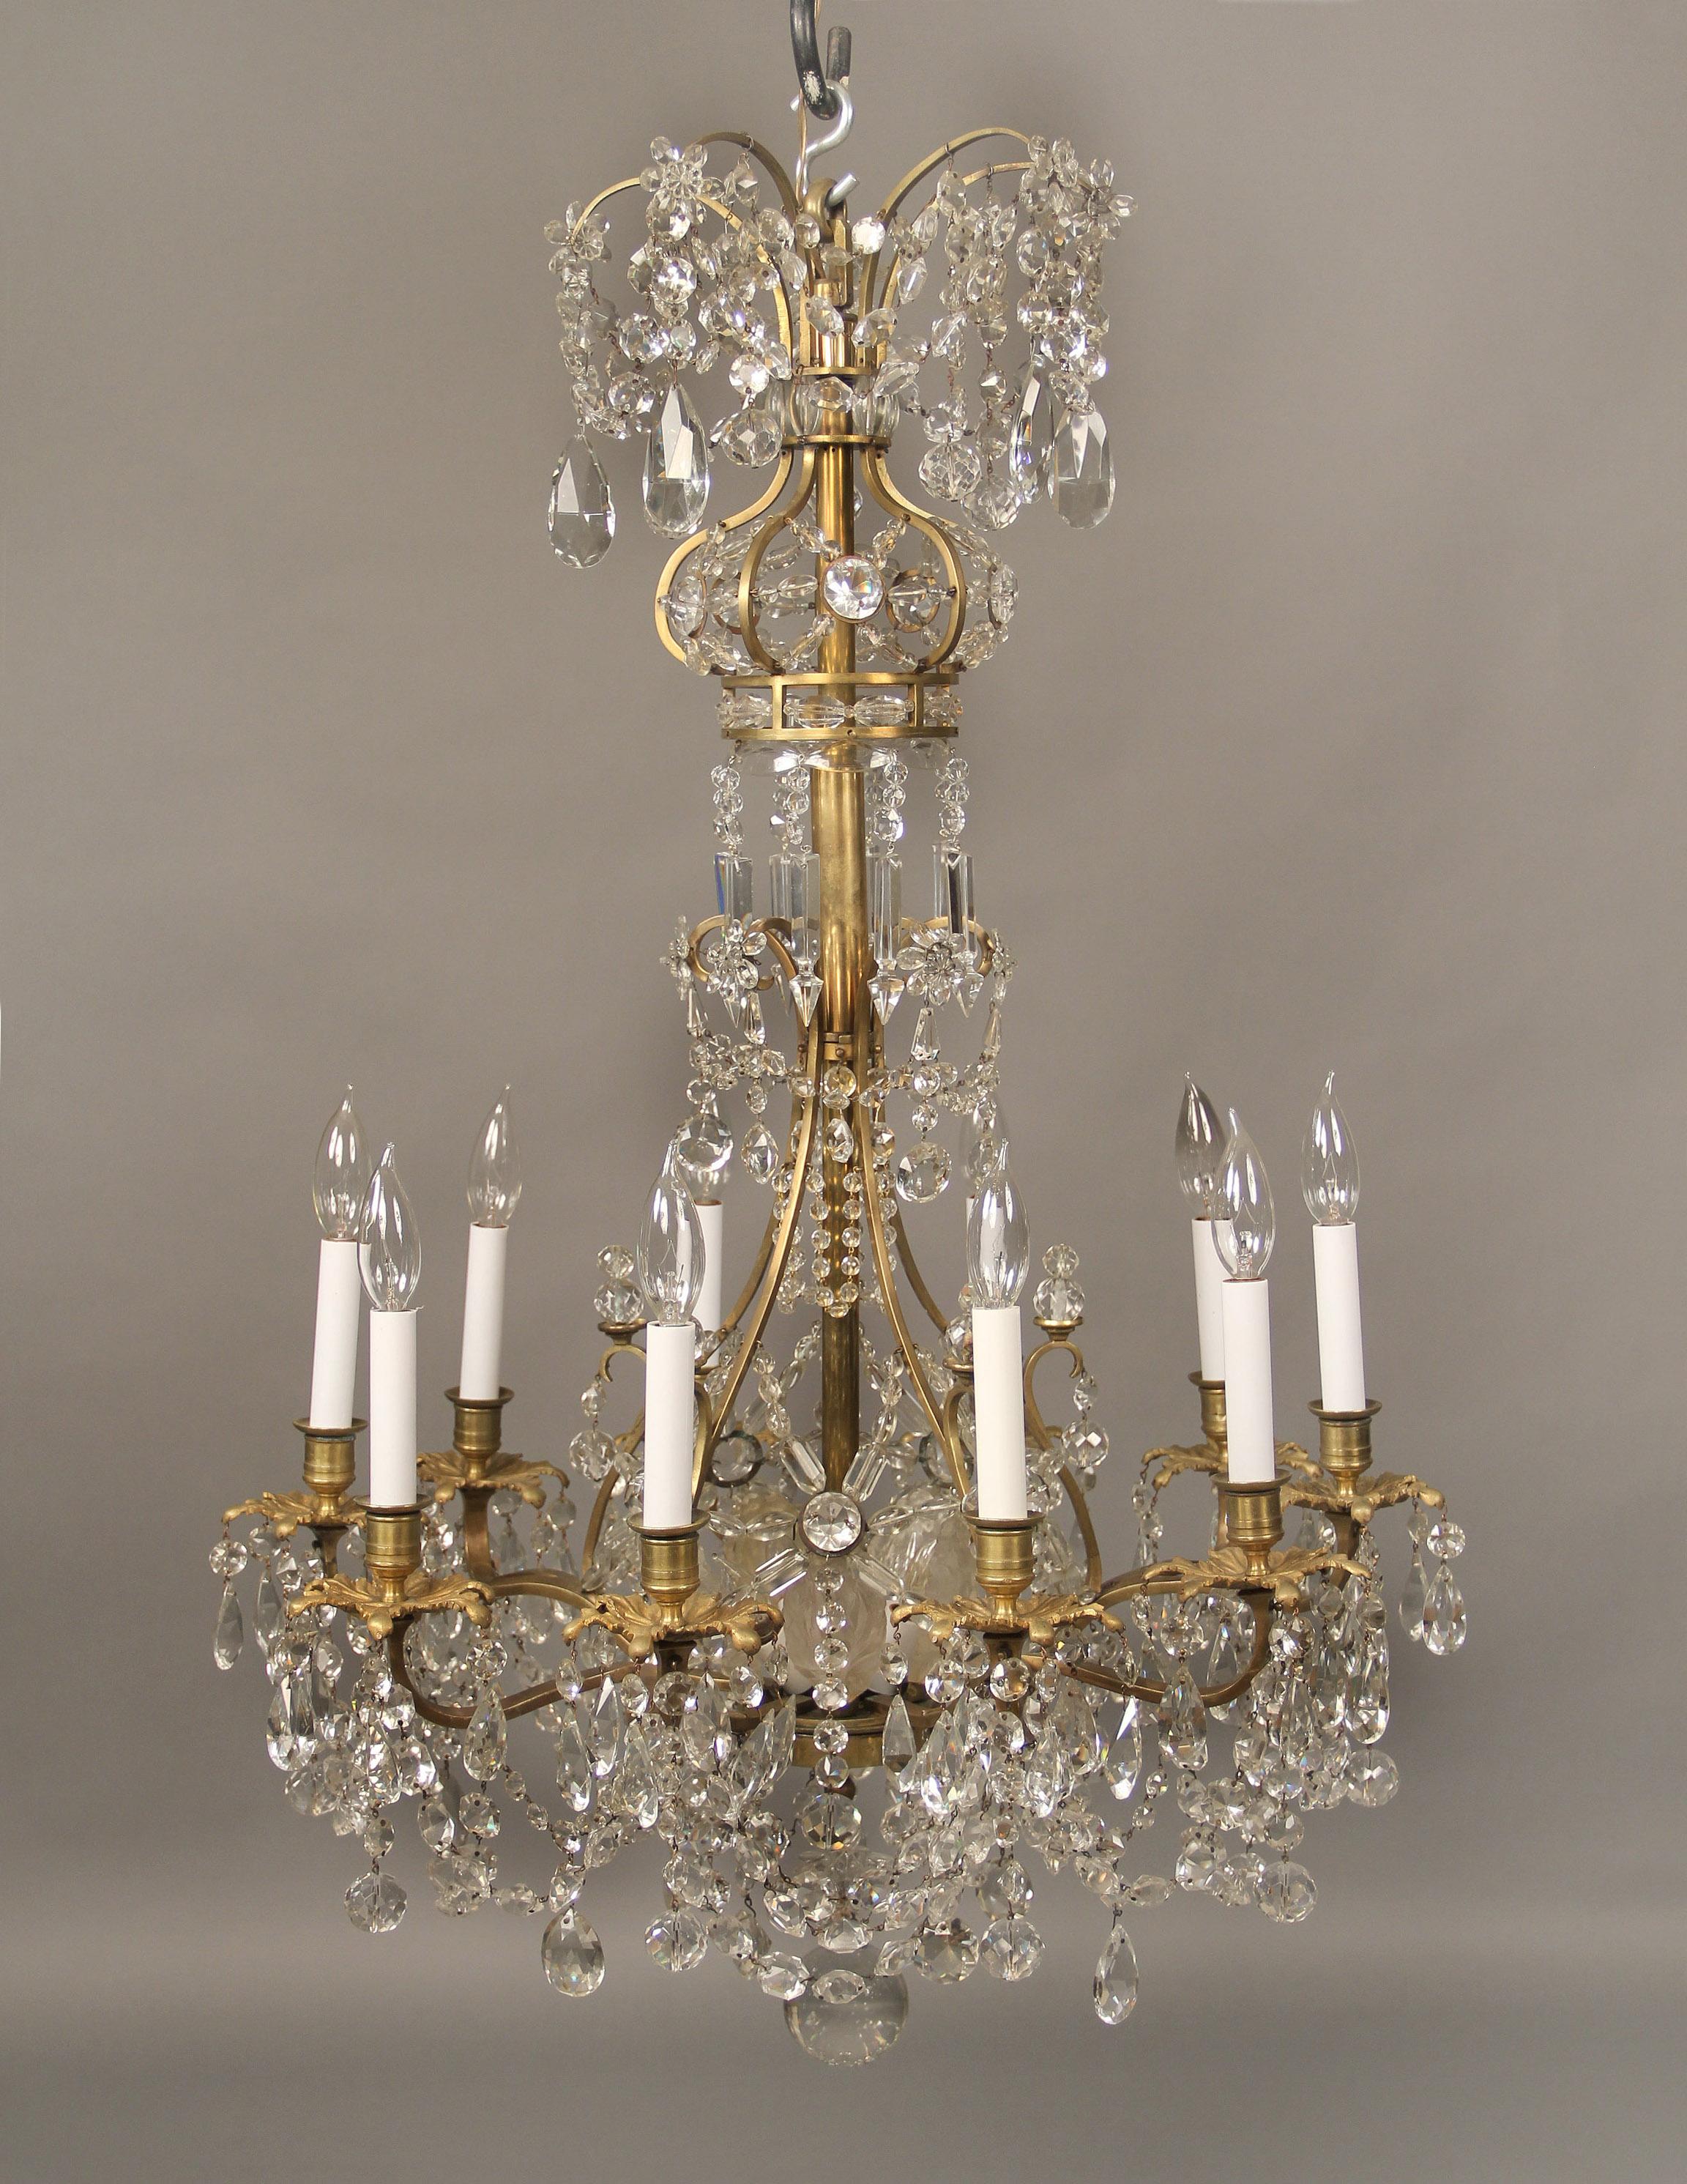 A lovely late 19th century gilt bronze and baccarat crystal fifteen light chandelier

Multifaceted and shaped crystals with drop pendants, balls and beads, the top shaped as a crown, the center lights surrounded by frosted crystal leaves, ten